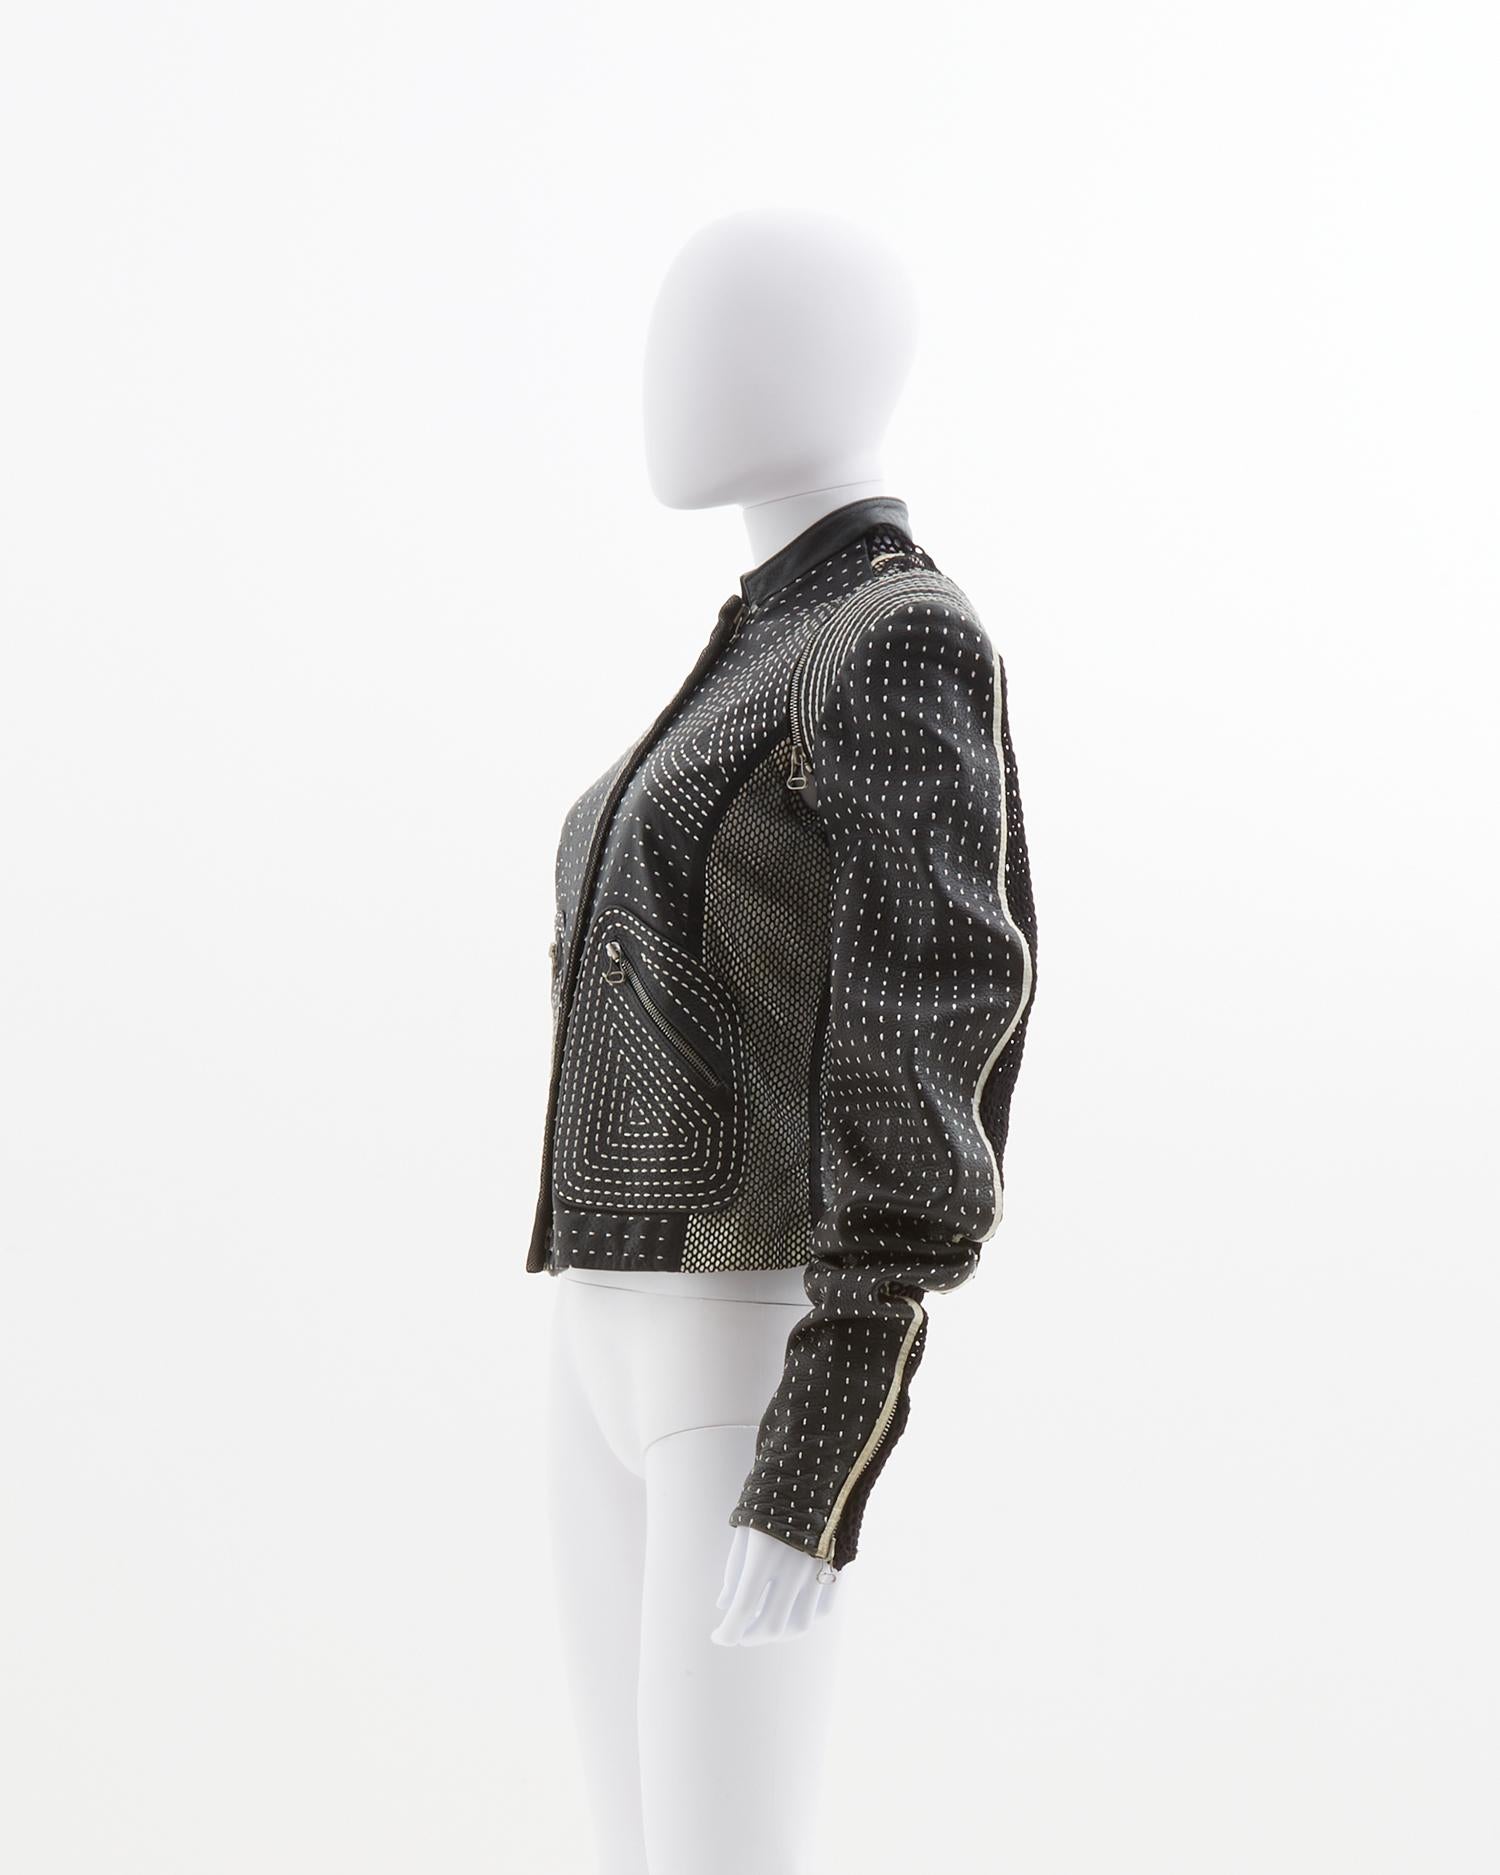 Gianfranco Ferrè Black back netted motorcycle leather jacket, early 2000s In Good Condition For Sale In Milano, IT